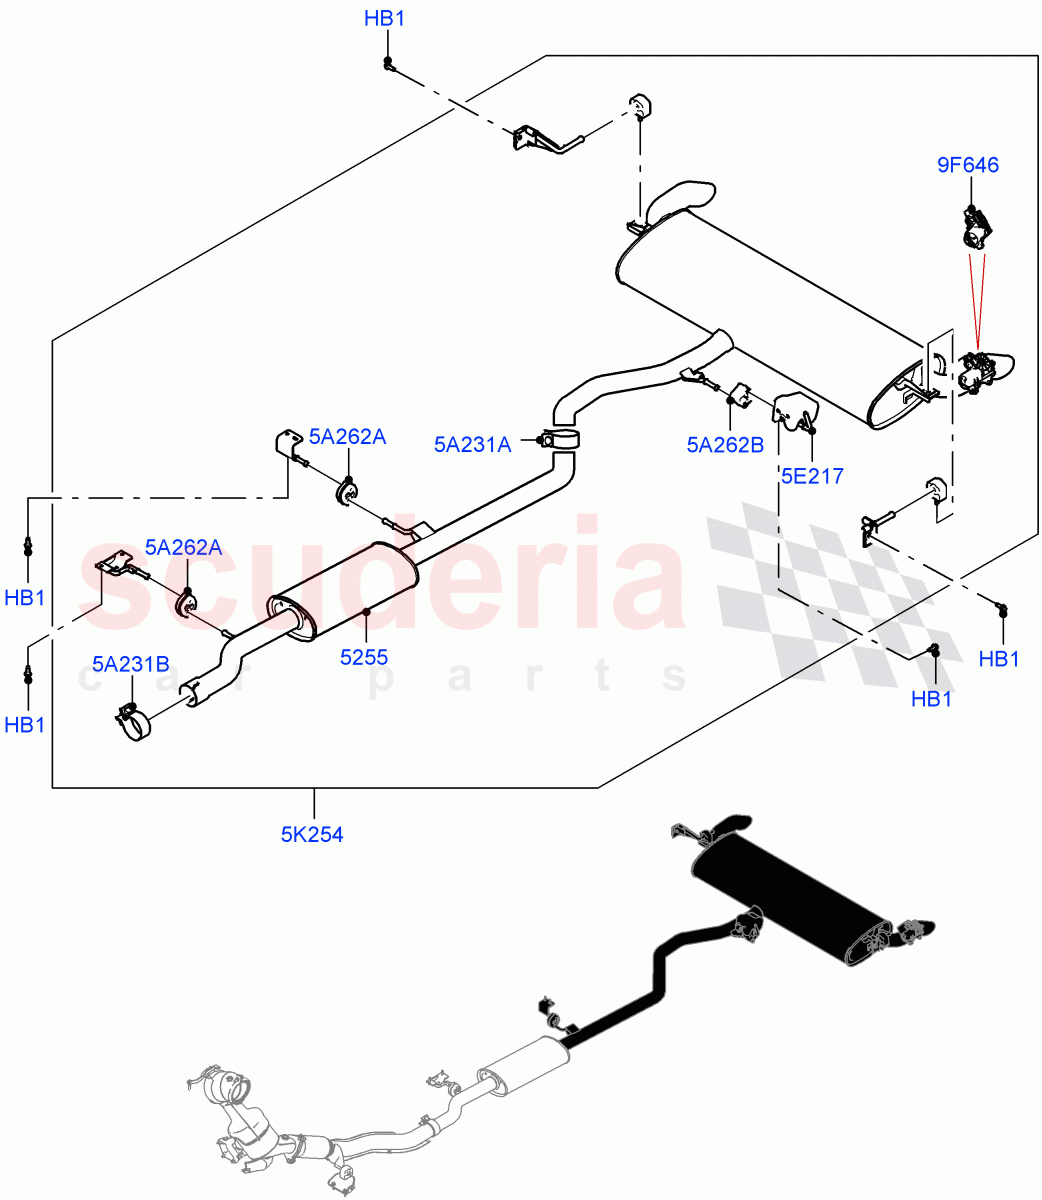 Rear Exhaust System(2.0L AJ20P4 Petrol E100 PTA,Itatiaia (Brazil),With 3rd Row Double Seat,Instant Mobility System - High)((V)FROMLT000001) of Land Rover Land Rover Discovery Sport (2015+) [2.0 Turbo Petrol AJ200P]